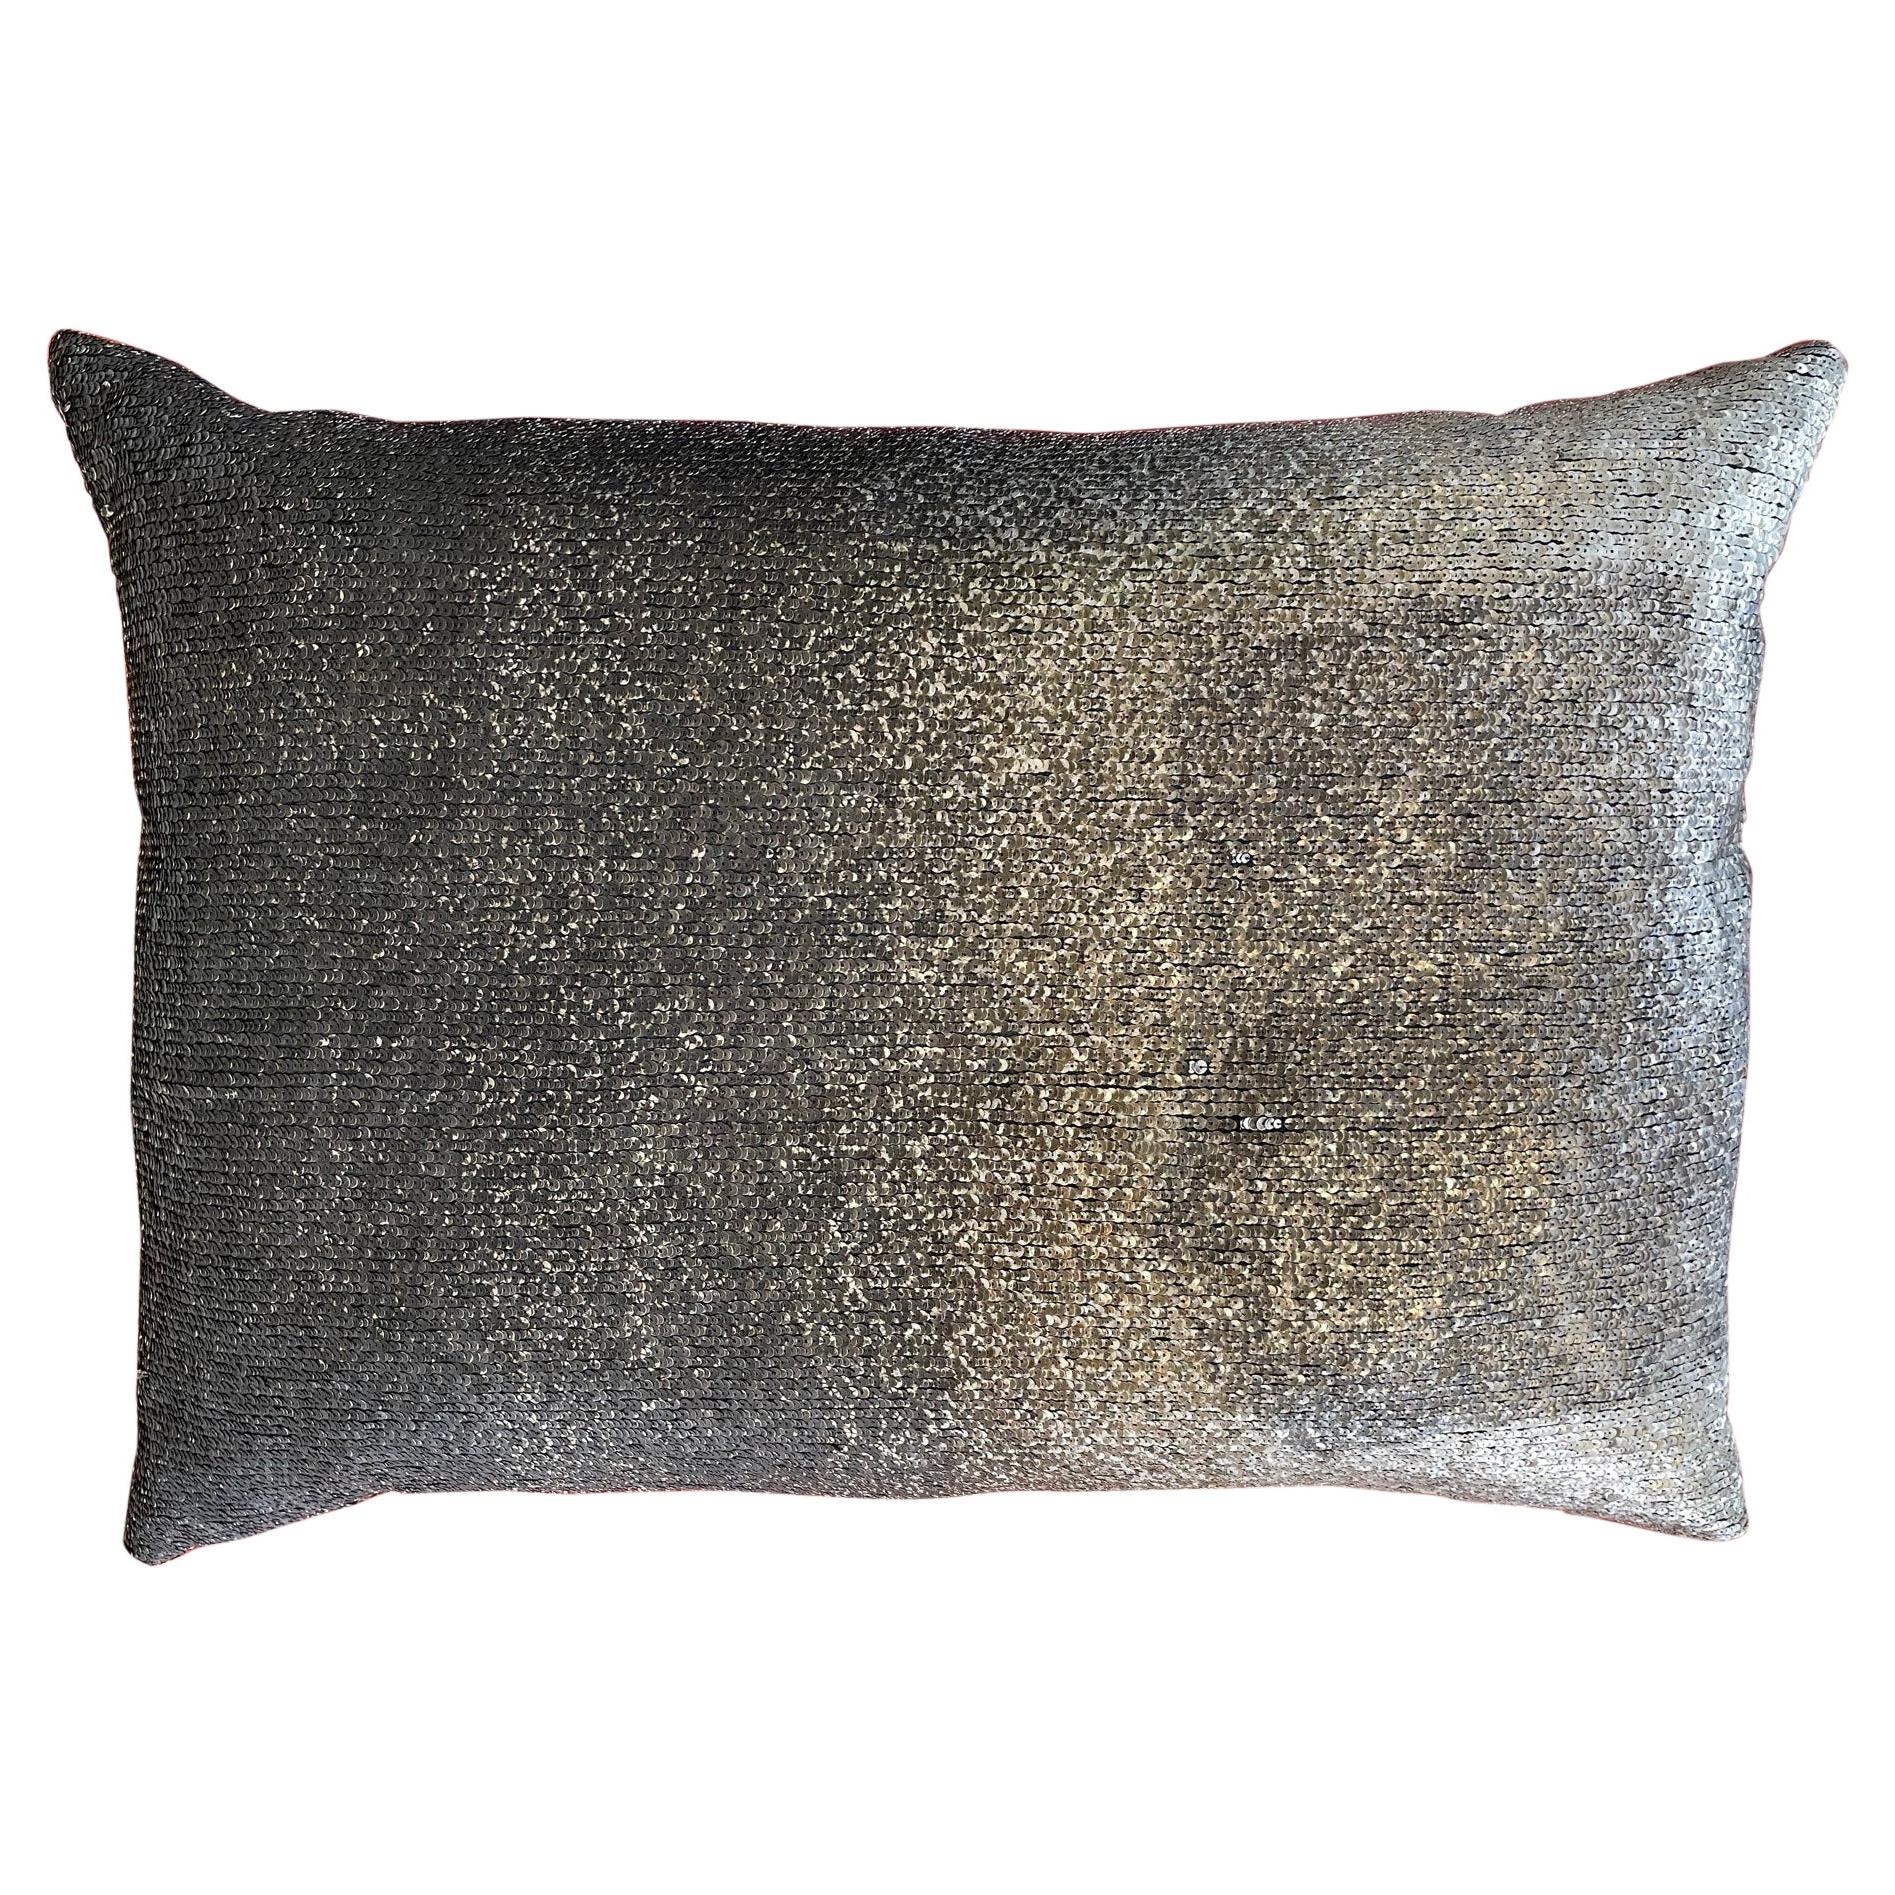 Cushion with Silver Sequins Hand Embroidered over Printed with Hand Block Print For Sale